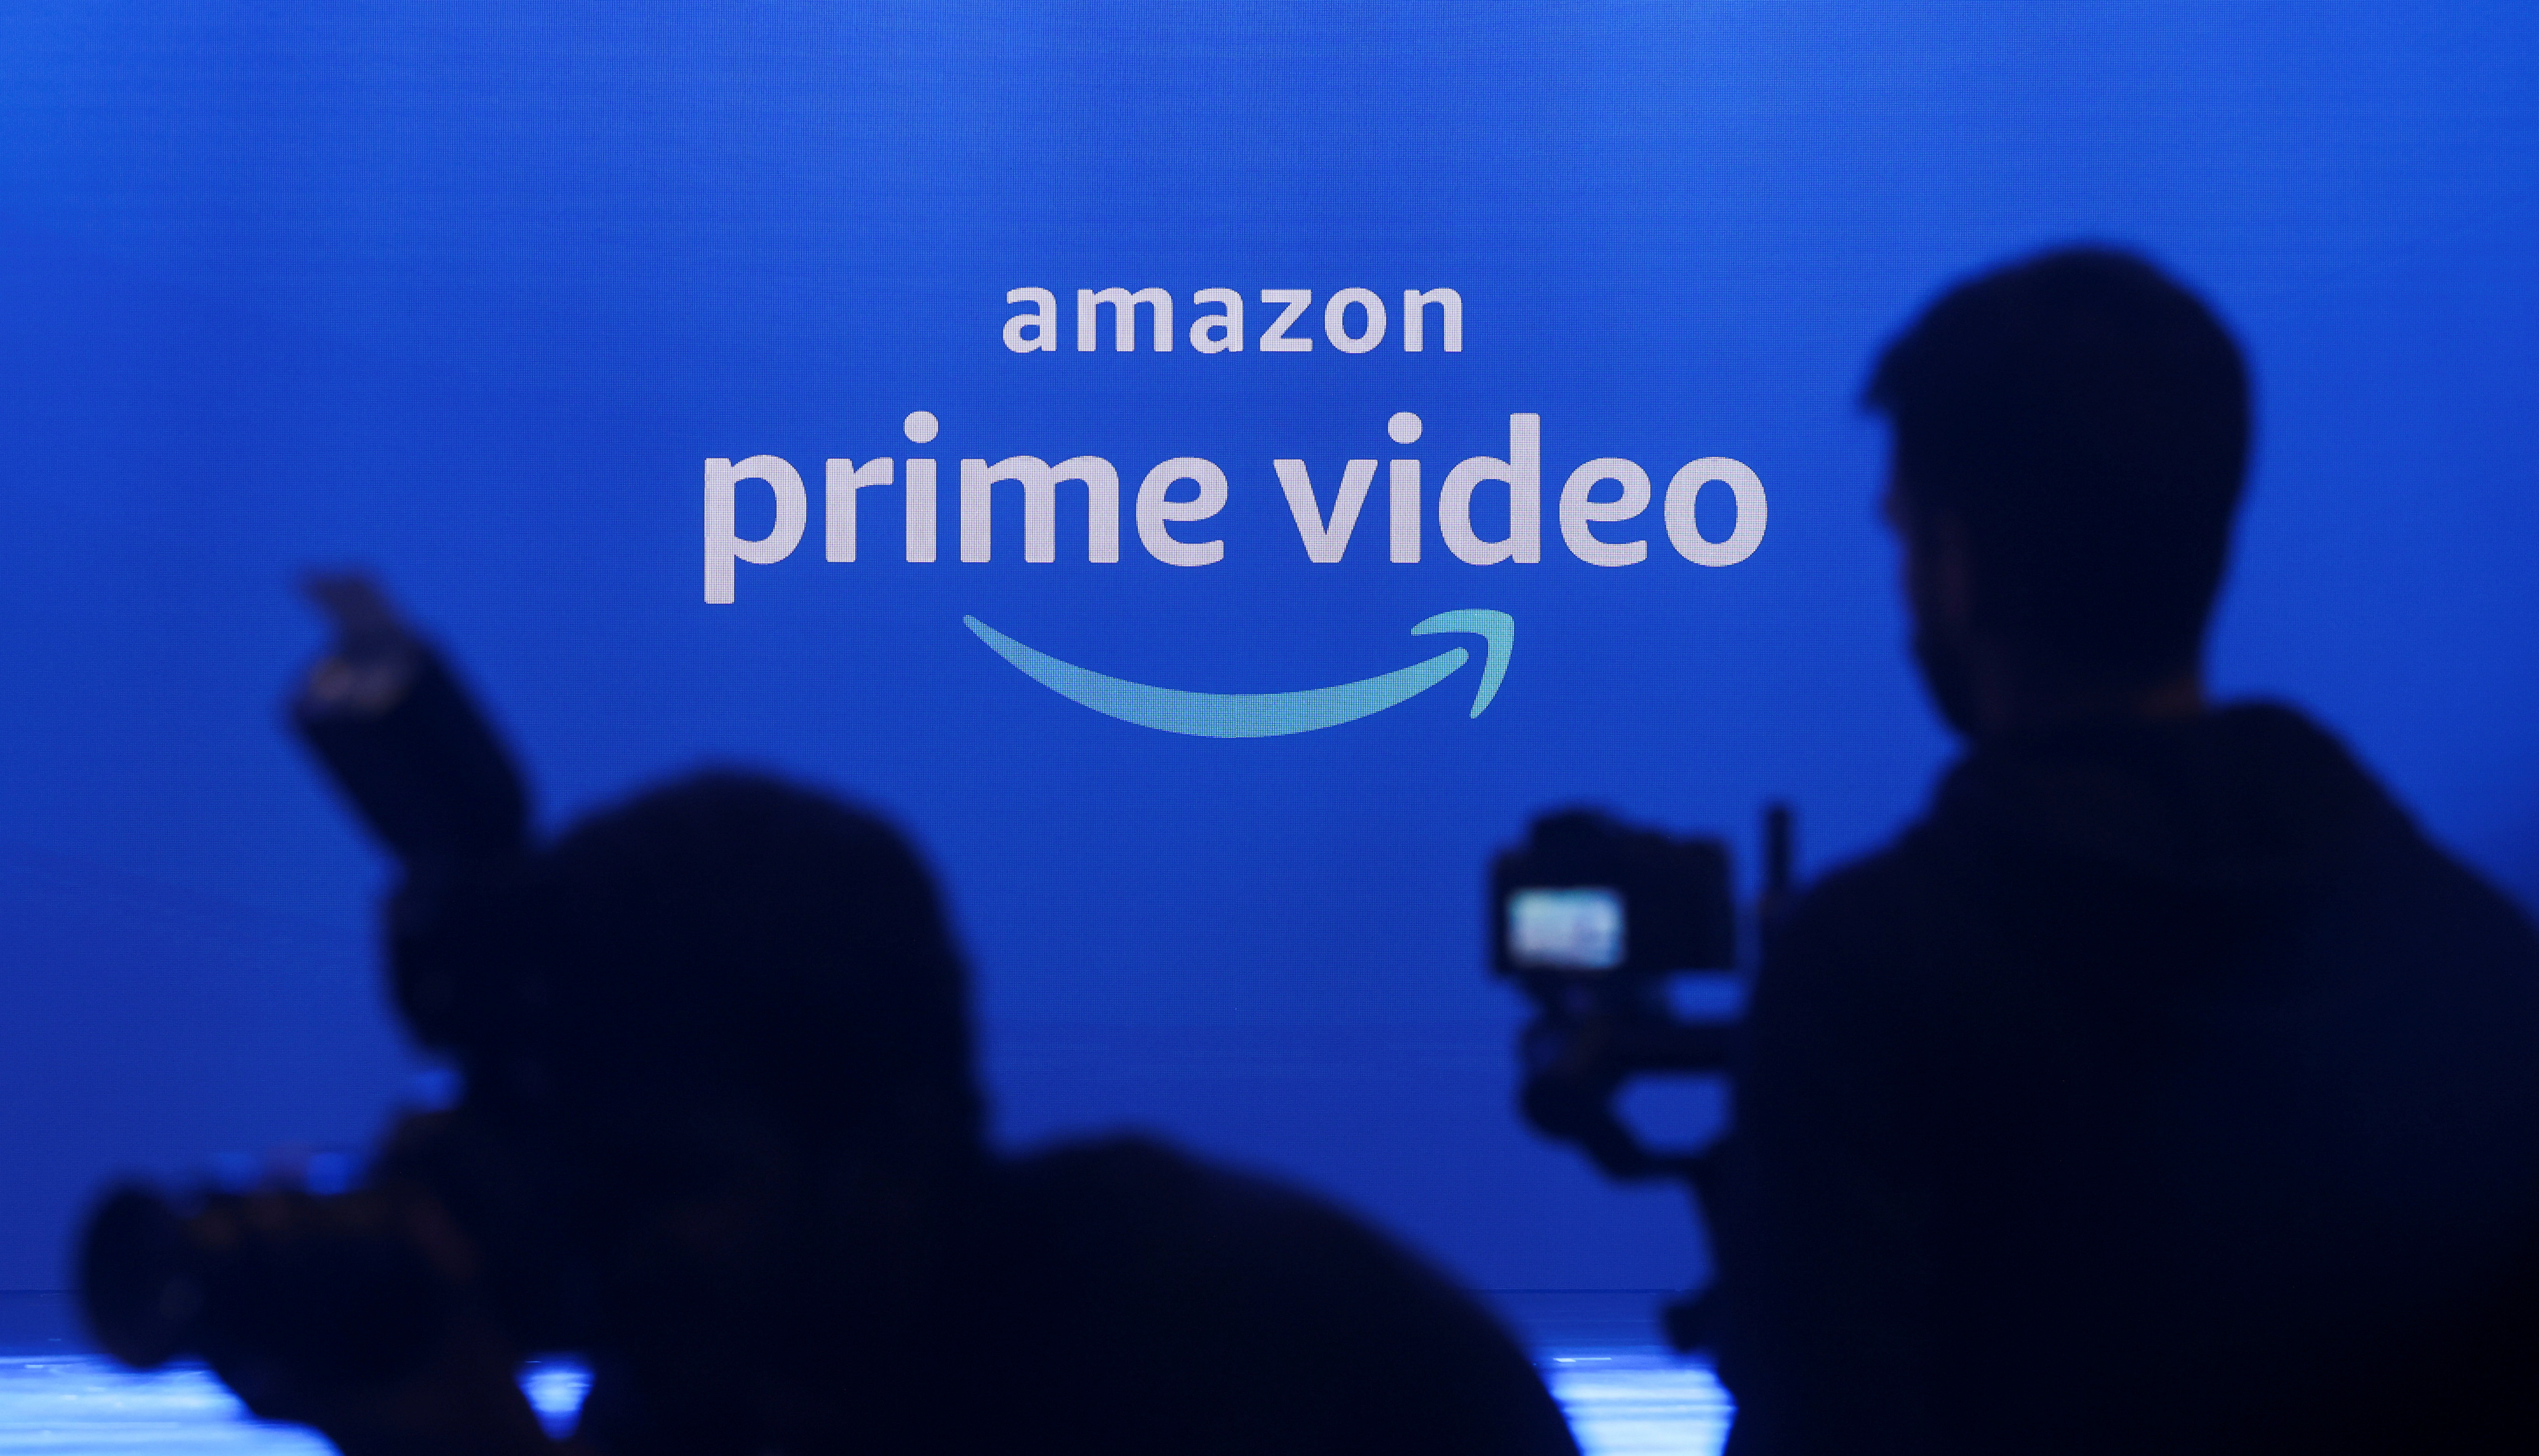 Media are seen in front of an Amazon Prime Video logo during an Amazon Prime Video India launch event in Mumbai